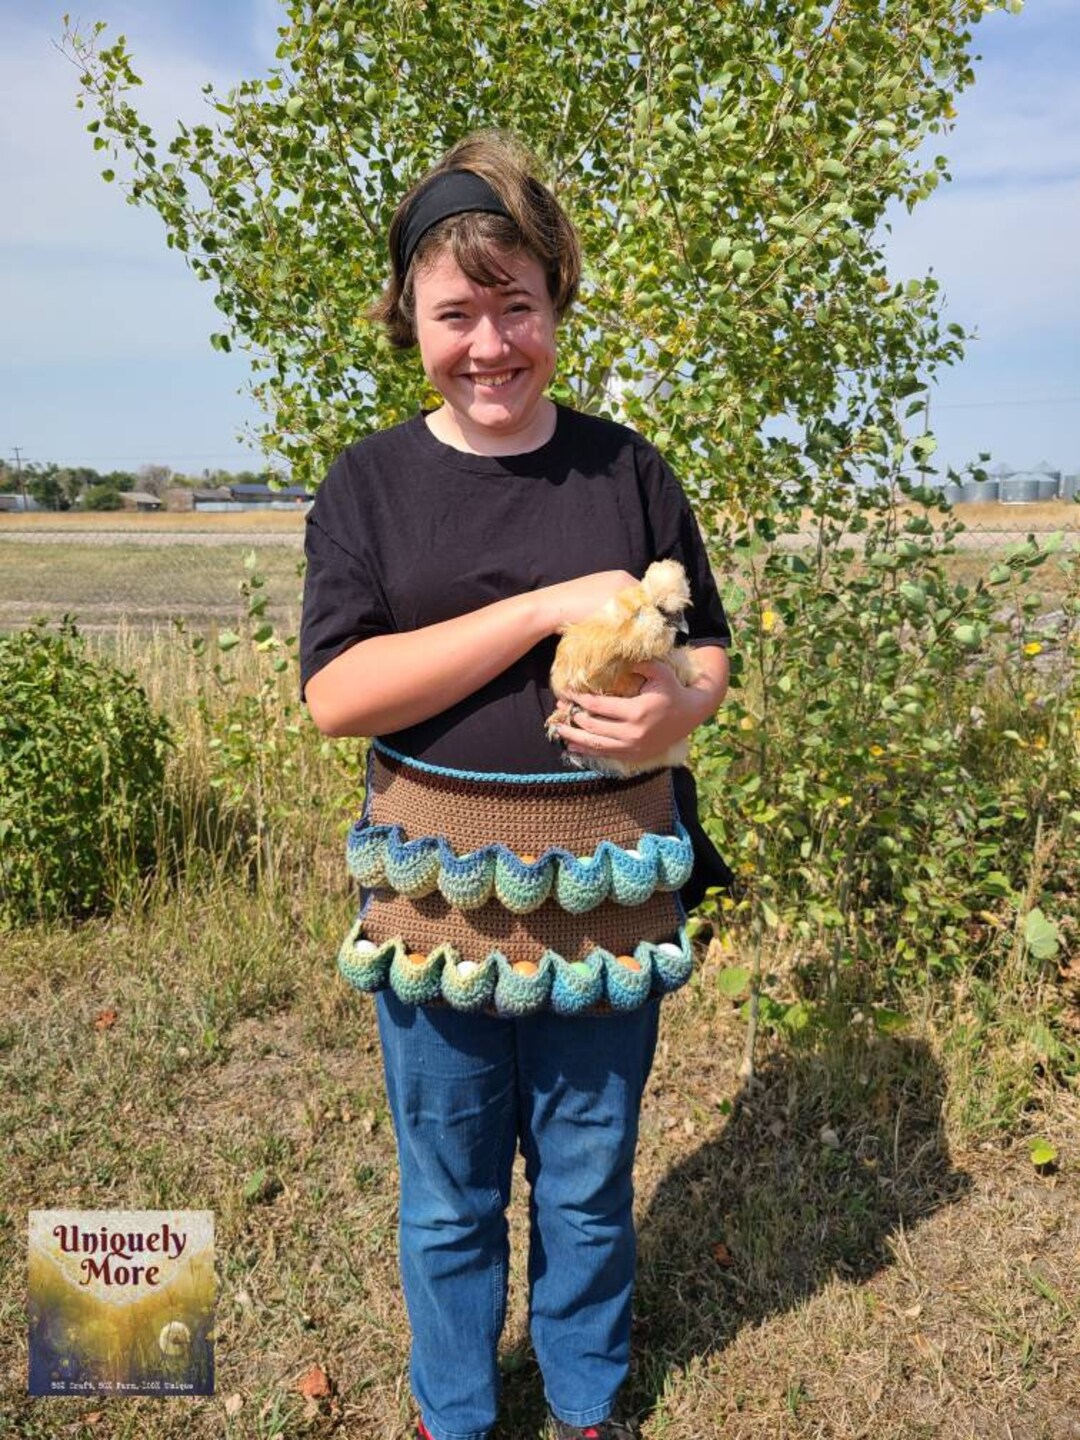 DBC Egg Collecting Apron For Chicken Farmers Pockets, S M L Sizes